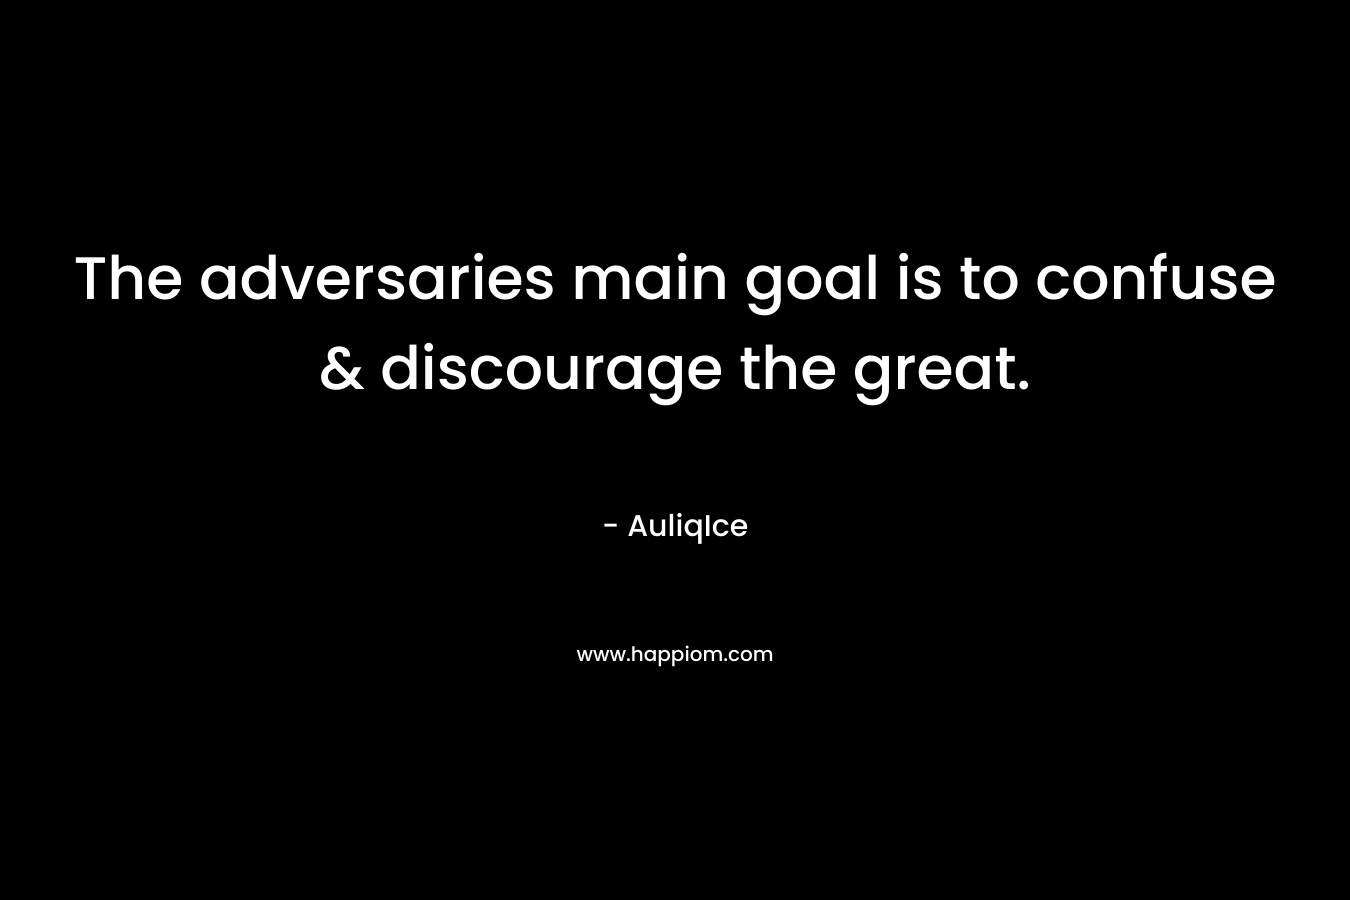 The adversaries main goal is to confuse & discourage the great. – AuliqIce